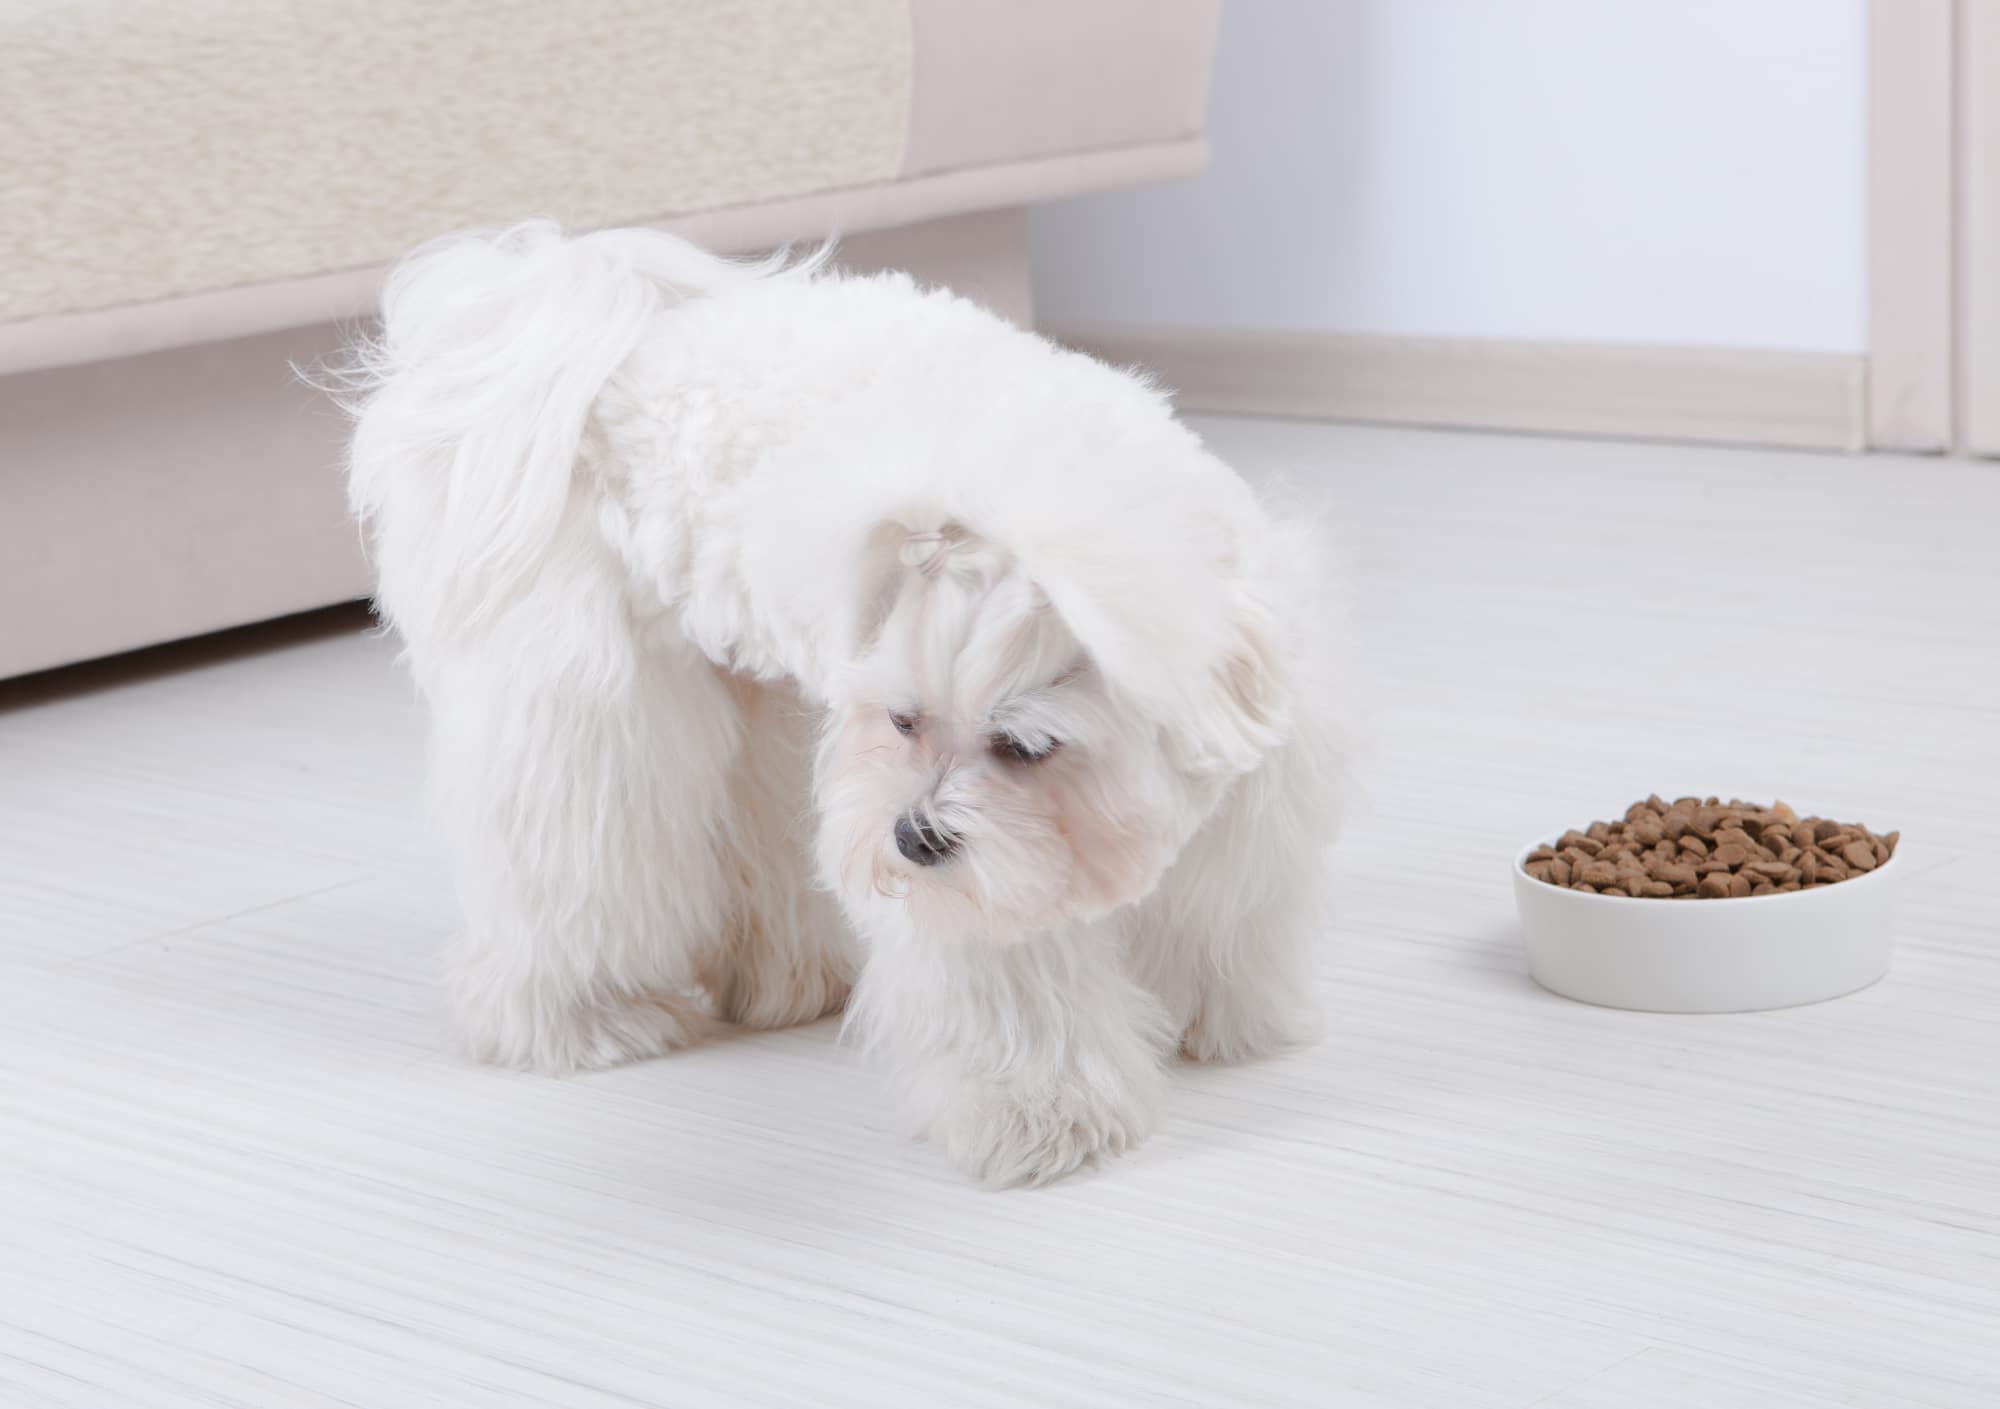 What To Do When Your Dog Won’t Eat Dog Food But Will Eat Human Food